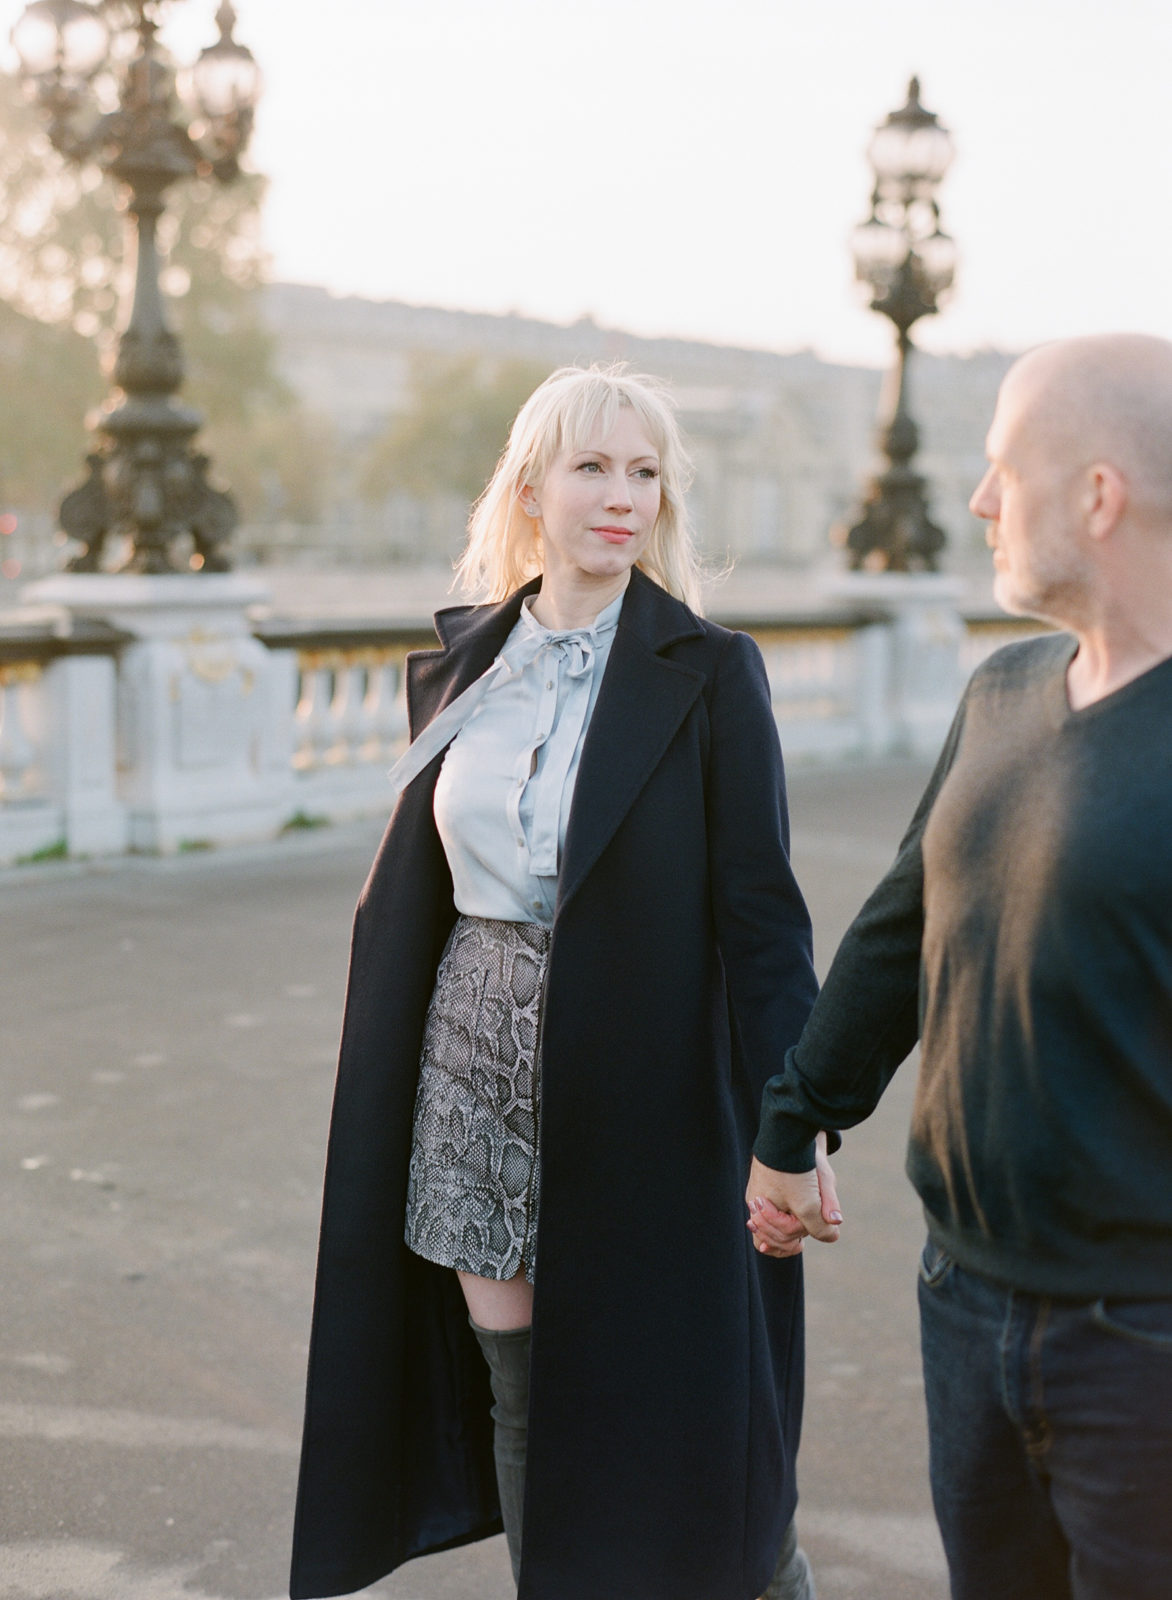 Fall Engagement Photos in Paris | Paris Film Photographer | Engagement Session | France Wedding Photographer | Isibieal Studio | Molly Carr Photography | Pont Alexandre III Engagement Photos